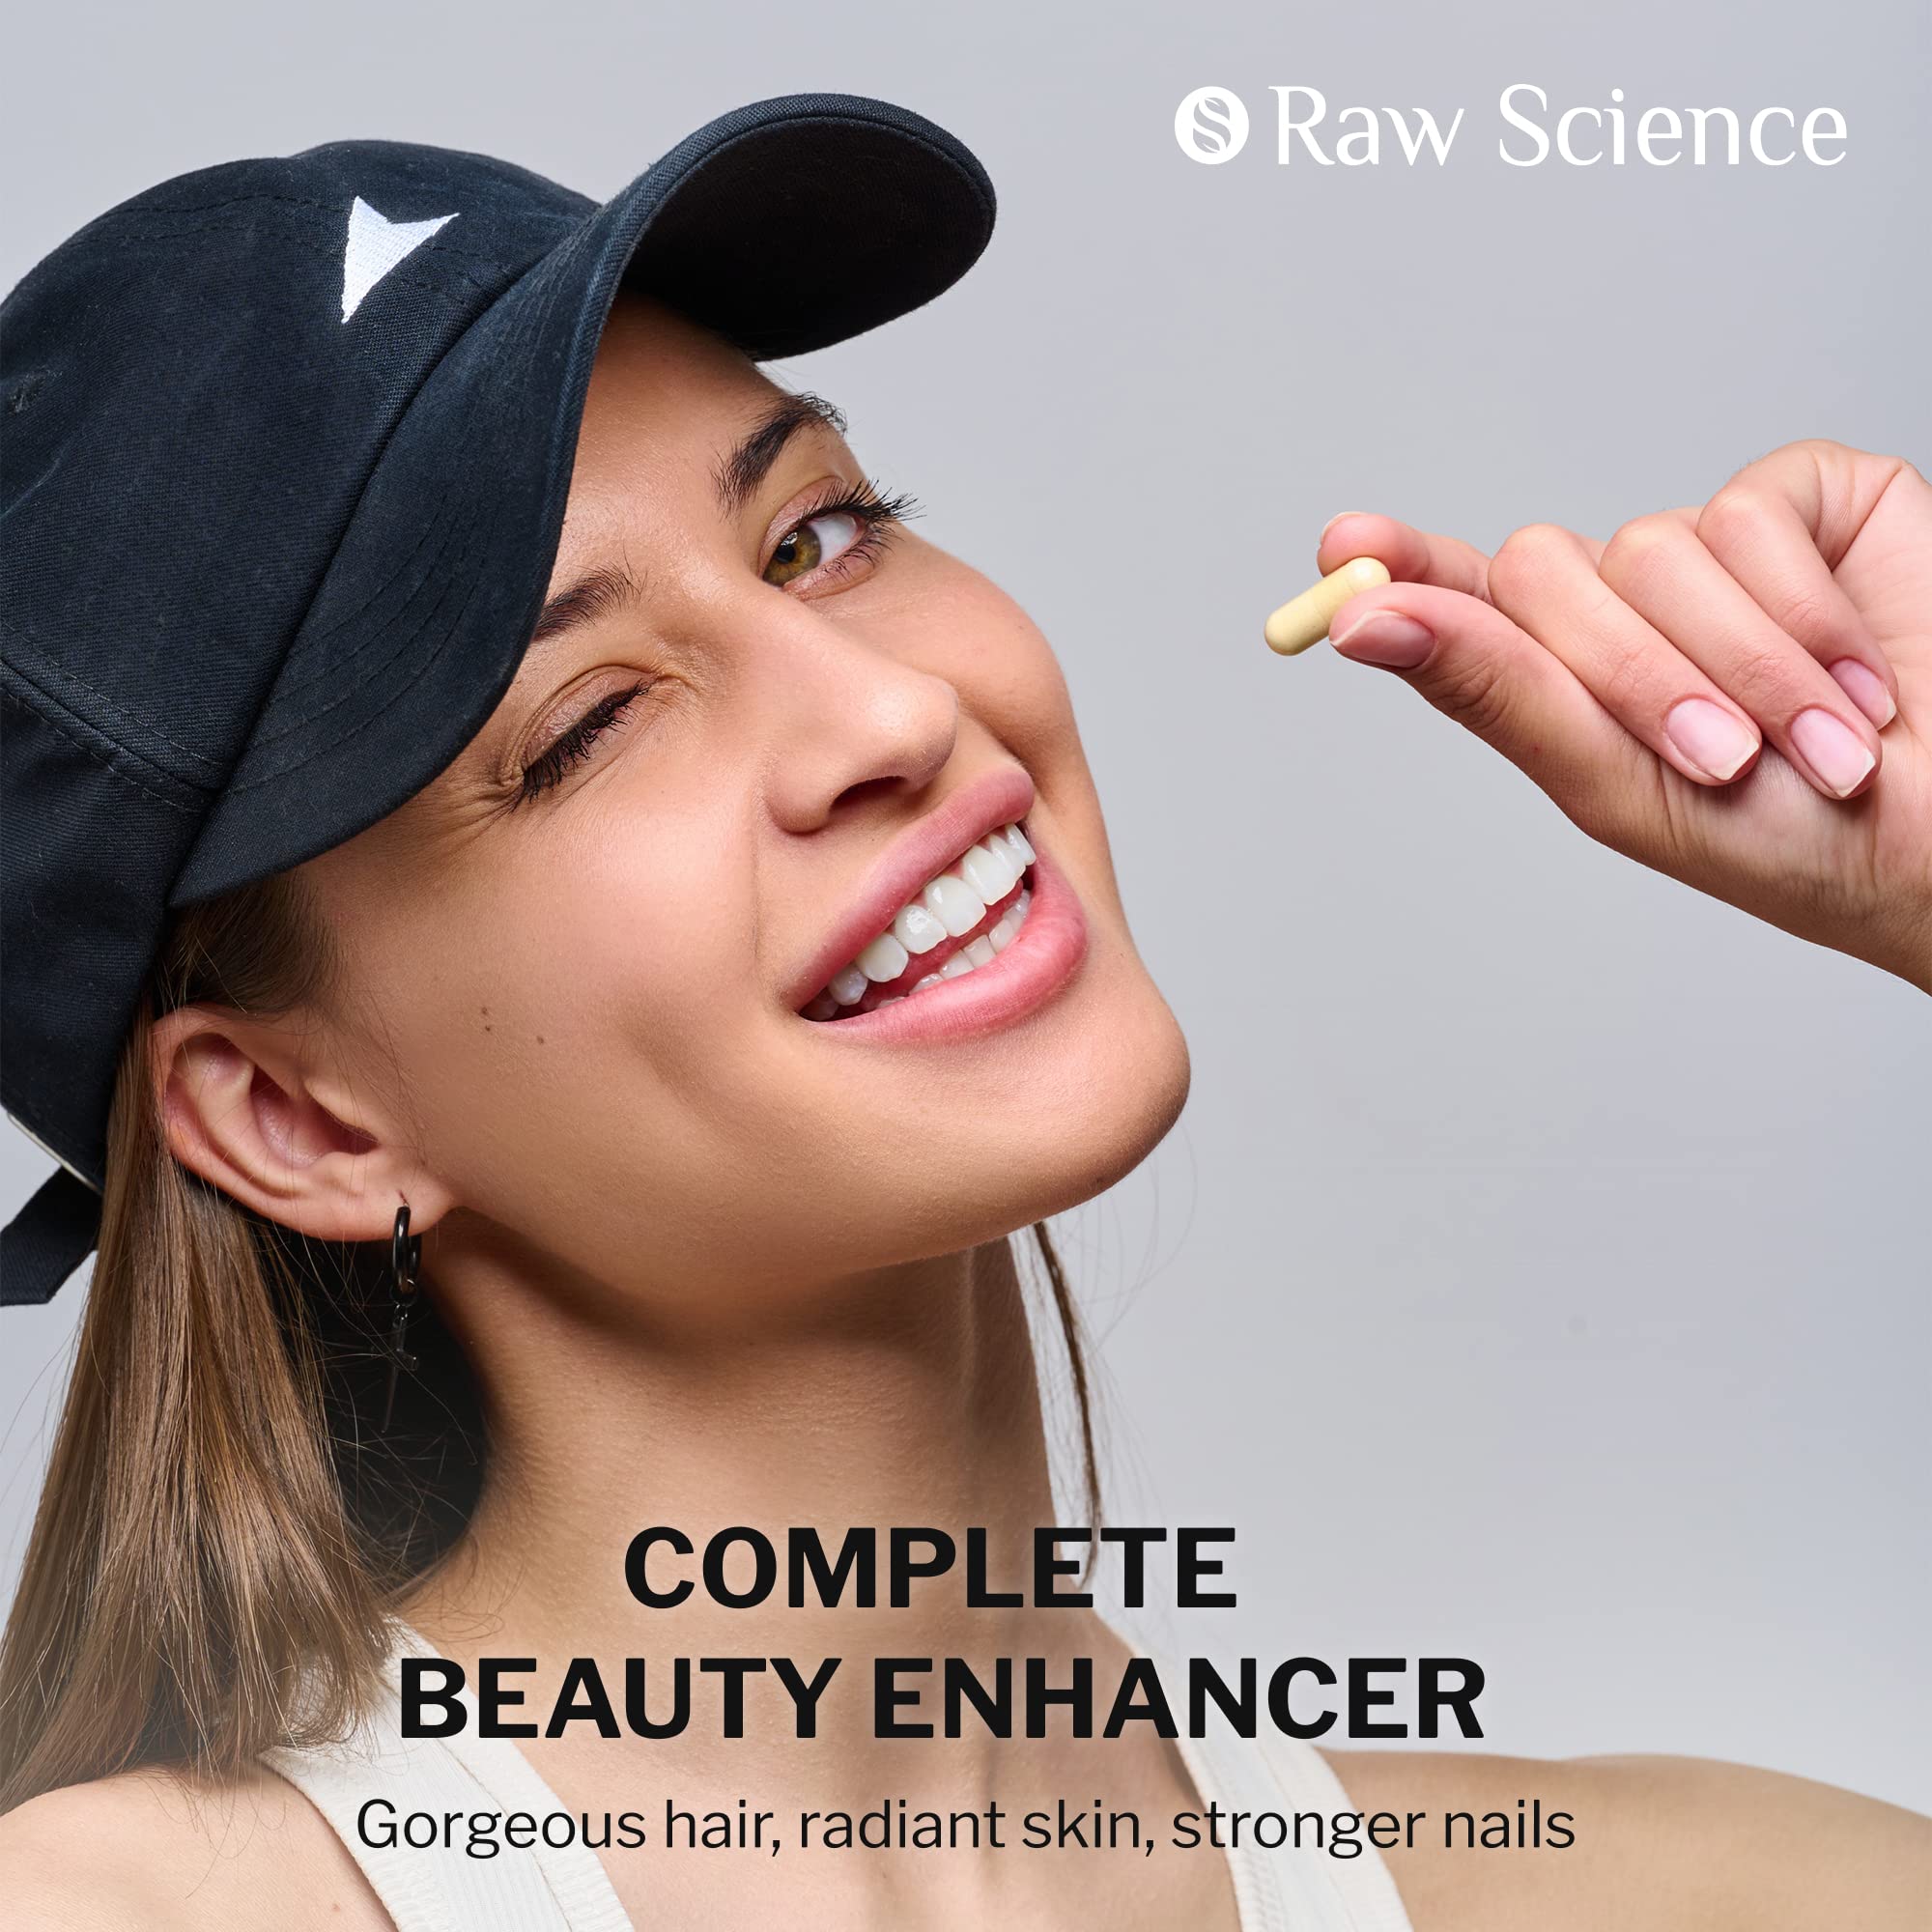 S RAW SCIENCE Vitamins for Healthy Hair, Skin and Nails - Biotin & Collagen & Keratin Capsules 25000mcg 60pcs and Biotin & Collagen Drops 30000mcg 2oz